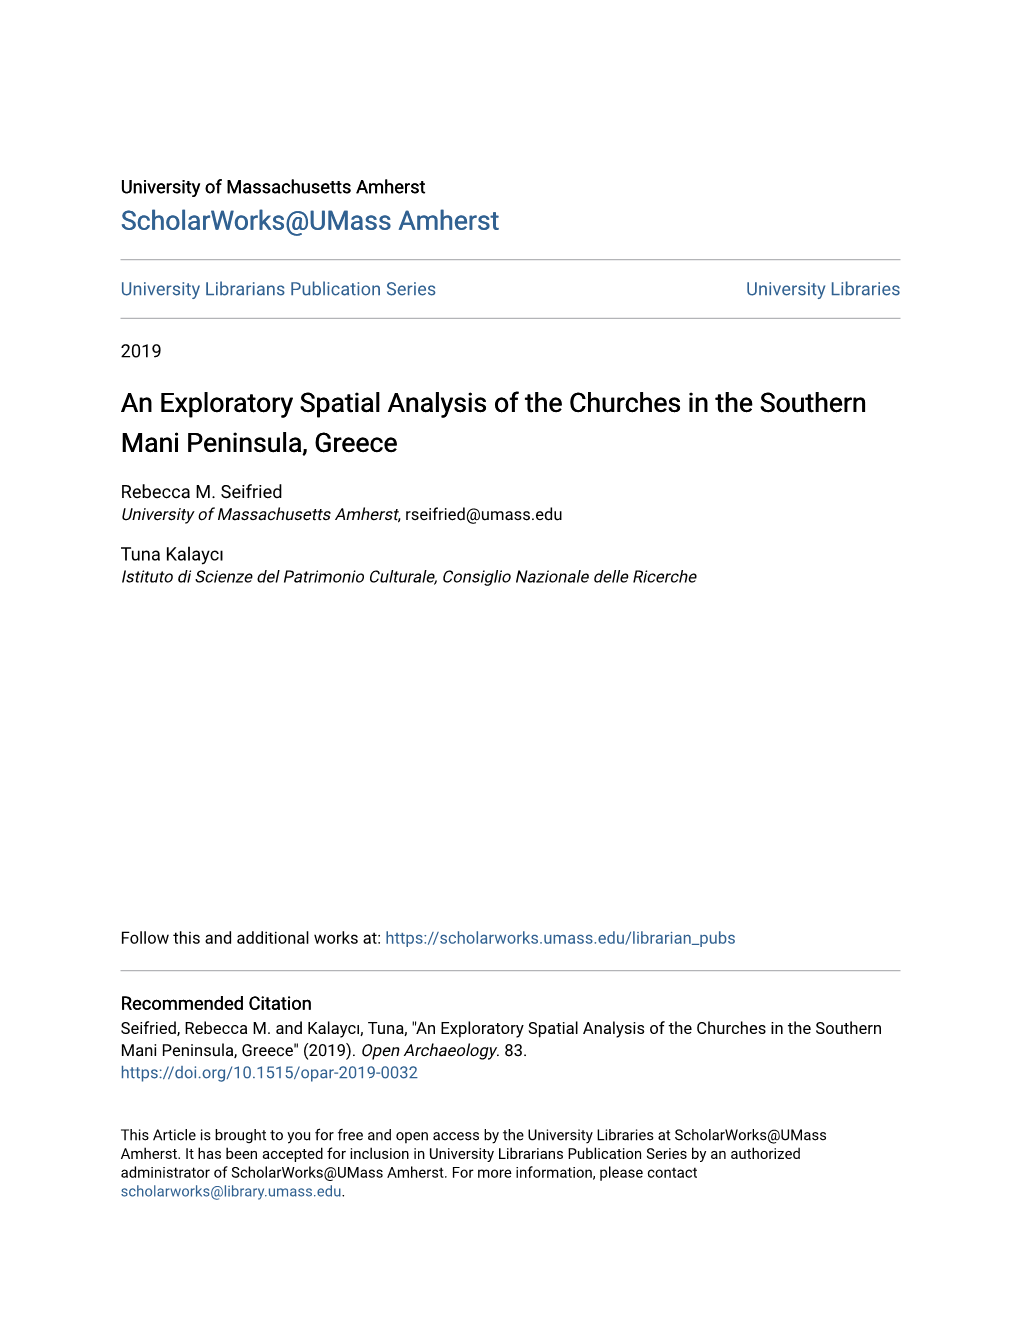 An Exploratory Spatial Analysis of the Churches in the Southern Mani Peninsula, Greece